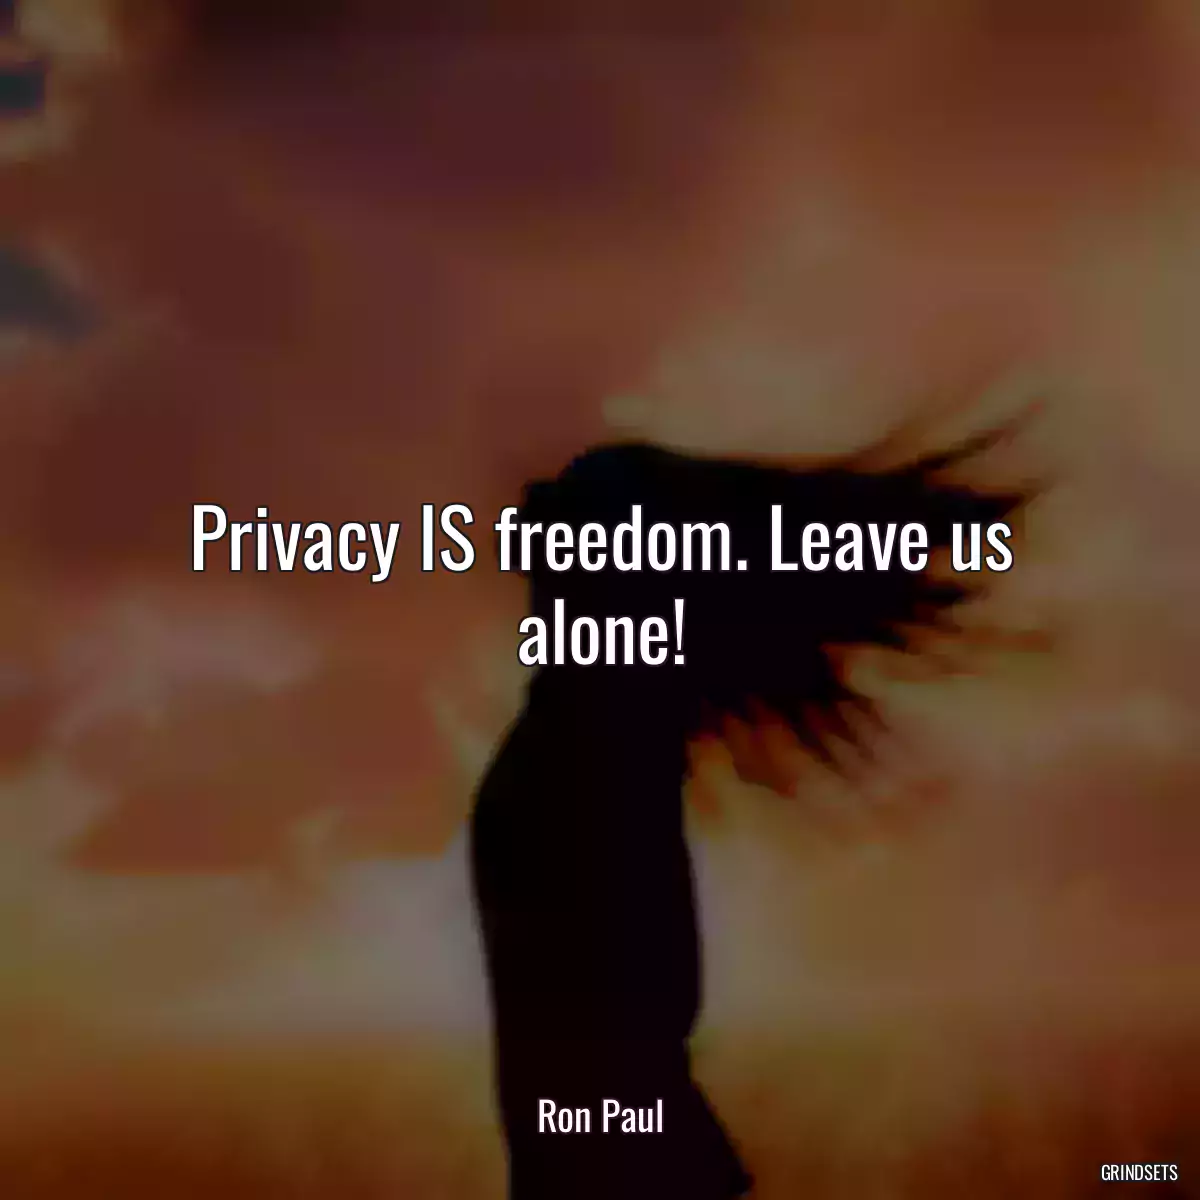 Privacy IS freedom. Leave us alone!